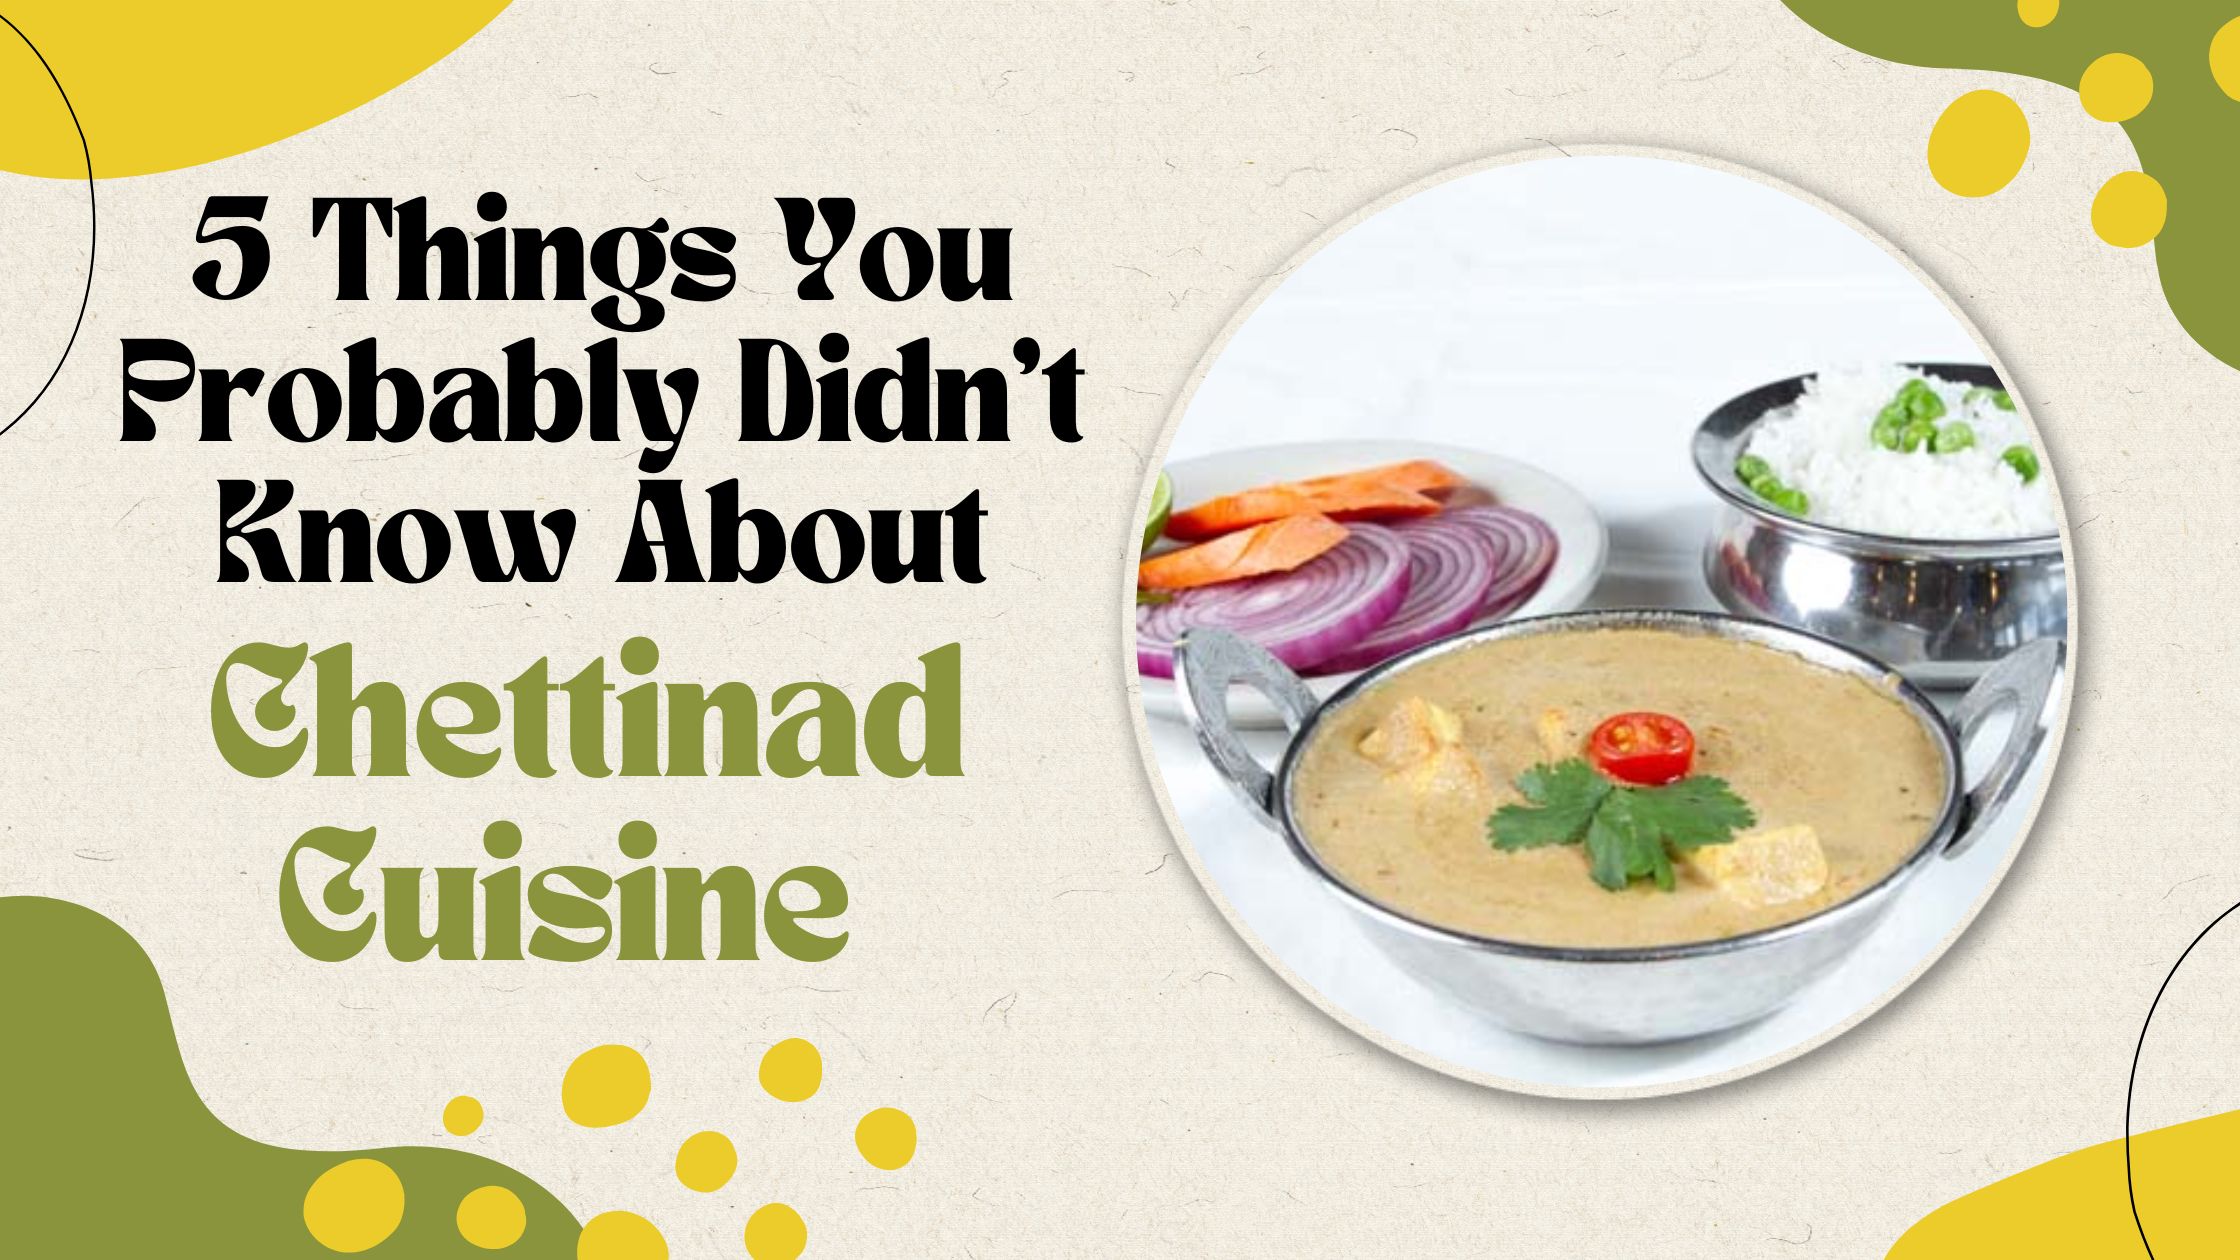 5 Things You Probably Didn't Know About Chettinad Cuisine